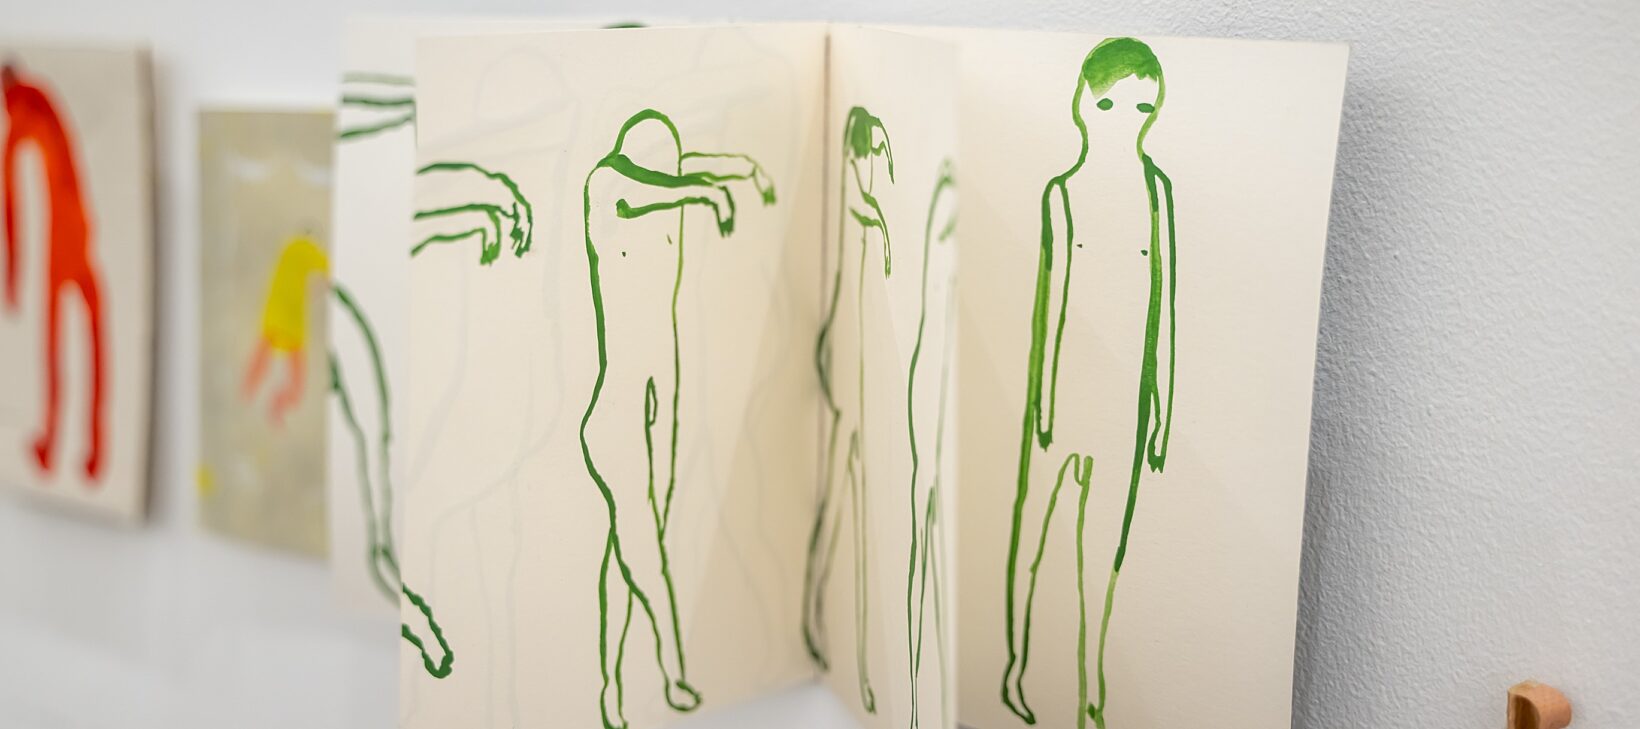 A small book has been hung on the wall. You can see images on various pages, showing small line drawings of green figures.